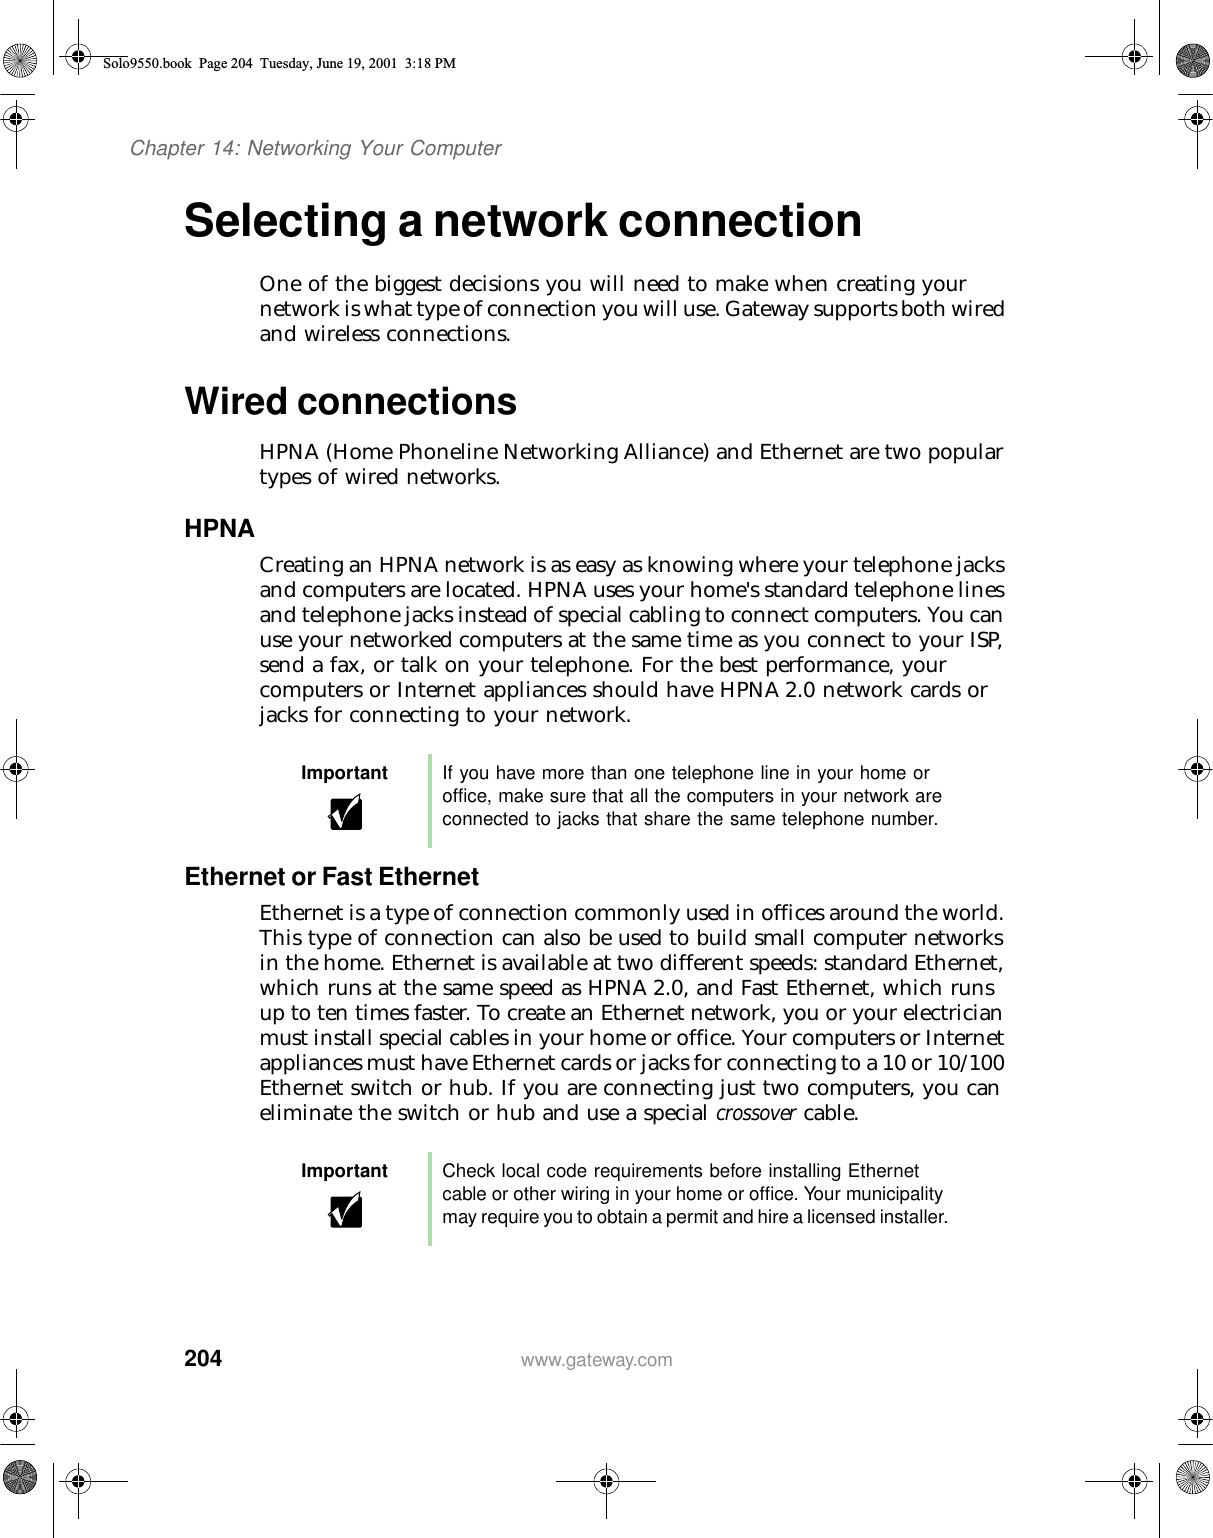 204Chapter 14: Networking Your Computerwww.gateway.comSelecting a network connectionOne of the biggest decisions you will need to make when creating your network is what type of connection you will use. Gateway supports both wired and wireless connections.Wired connectionsHPNA (Home Phoneline Networking Alliance) and Ethernet are two popular types of wired networks.HPNACreating an HPNA network is as easy as knowing where your telephone jacks and computers are located. HPNA uses your home&apos;s standard telephone lines and telephone jacks instead of special cabling to connect computers. You can use your networked computers at the same time as you connect to your ISP, send a fax, or talk on your telephone. For the best performance, your computers or Internet appliances should have HPNA 2.0 network cards or jacks for connecting to your network.Ethernet or Fast EthernetEthernet is a type of connection commonly used in offices around the world. This type of connection can also be used to build small computer networks in the home. Ethernet is available at two different speeds: standard Ethernet, which runs at the same speed as HPNA 2.0, and Fast Ethernet, which runs up to ten times faster. To create an Ethernet network, you or your electrician must install special cables in your home or office. Your computers or Internet appliances must have Ethernet cards or jacks for connecting to a 10 or 10/100 Ethernet switch or hub. If you are connecting just two computers, you can eliminate the switch or hub and use a special crossover cable.Important If you have more than one telephone line in your home or office, make sure that all the computers in your network are connected to jacks that share the same telephone number.Important Check local code requirements before installing Ethernet cable or other wiring in your home or office. Your municipality may require you to obtain a permit and hire a licensed installer.Solo9550.book Page 204 Tuesday, June 19, 2001 3:18 PM